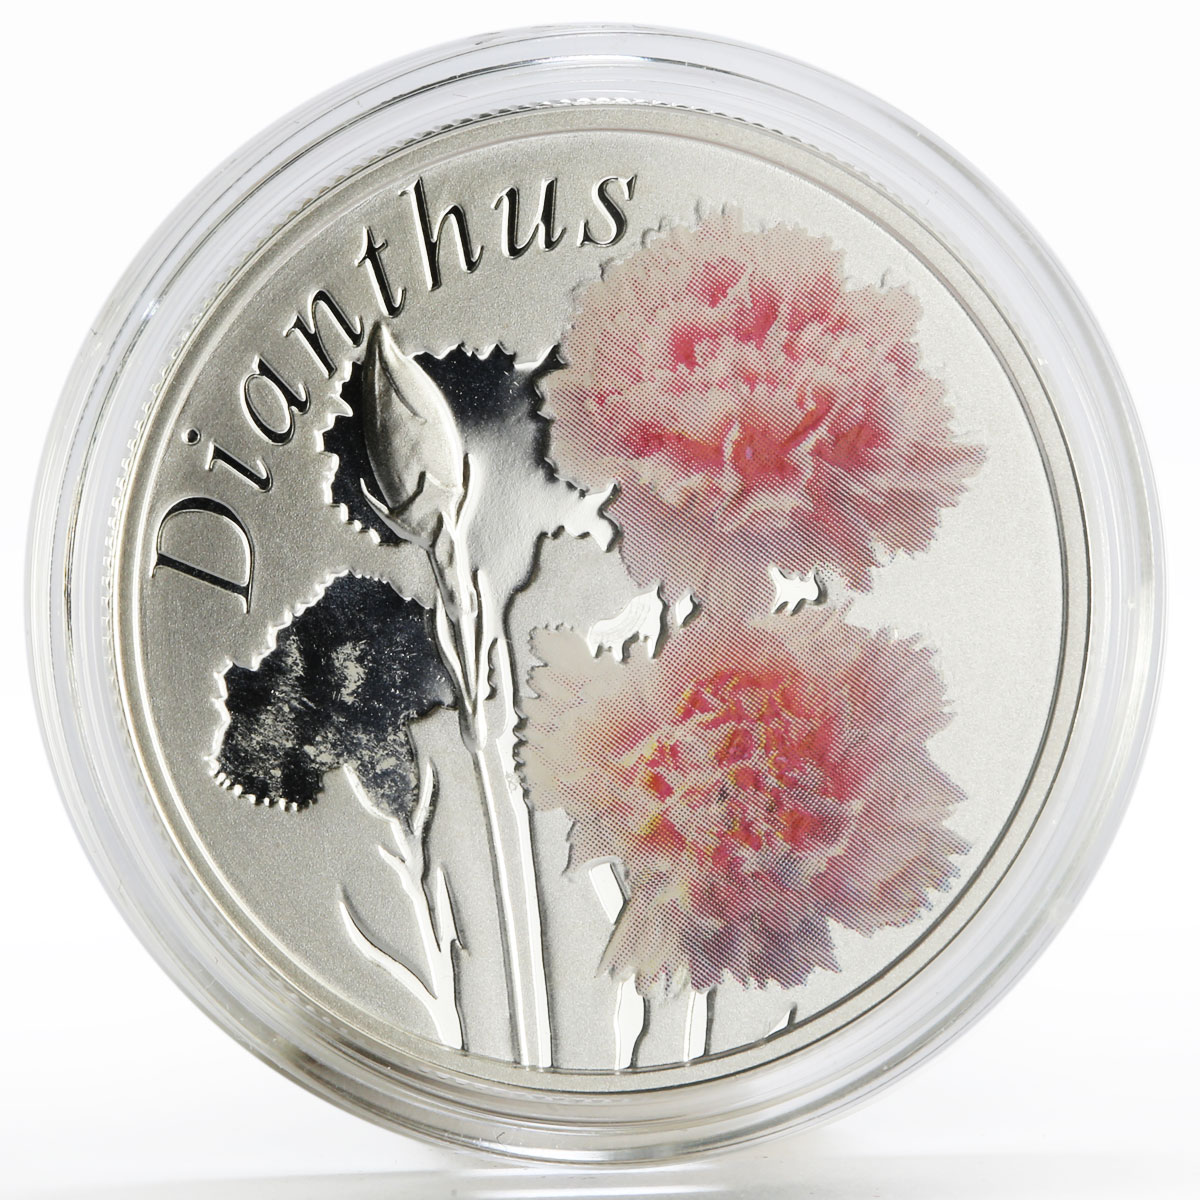 Belarus 10 rubles Beauty of Flowers series Carnation proof silver coin 2013